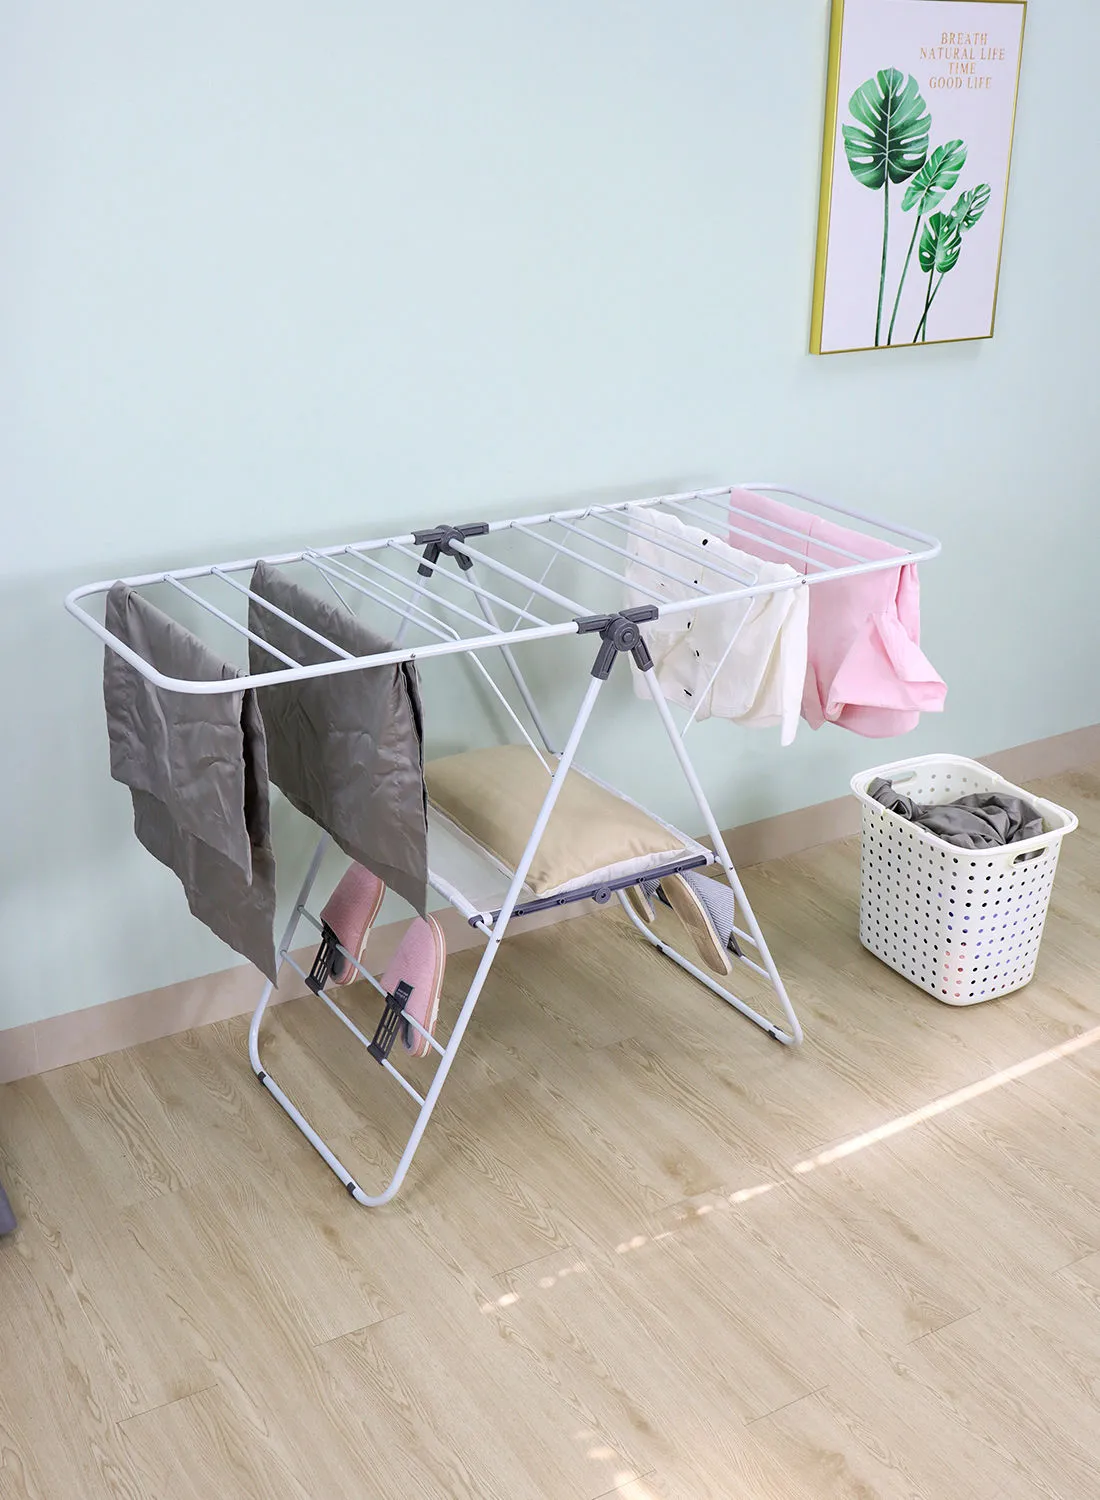 Amal Foldable Cloth Drying Rack Hanger With Net Shelf And Shoe Holder Steel Frame Space Saver White 96 x 144 x 60cm